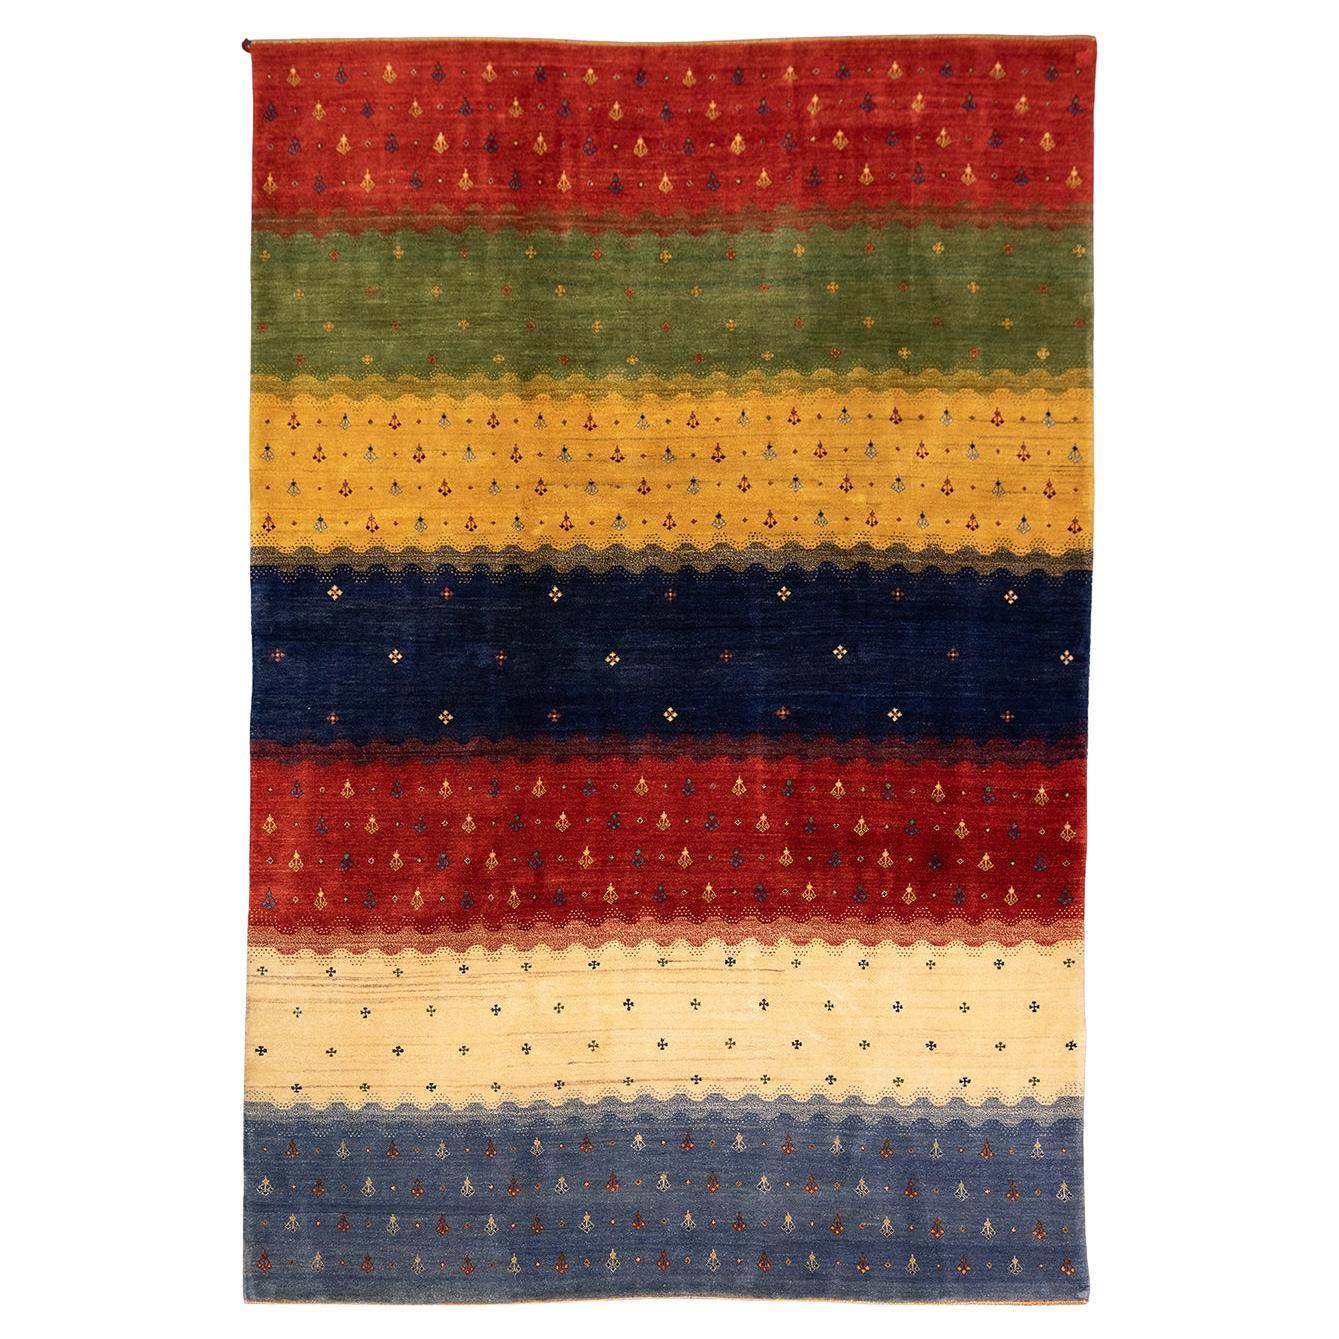 Gabbeh Rug Colorful Striped Pattern For Sale